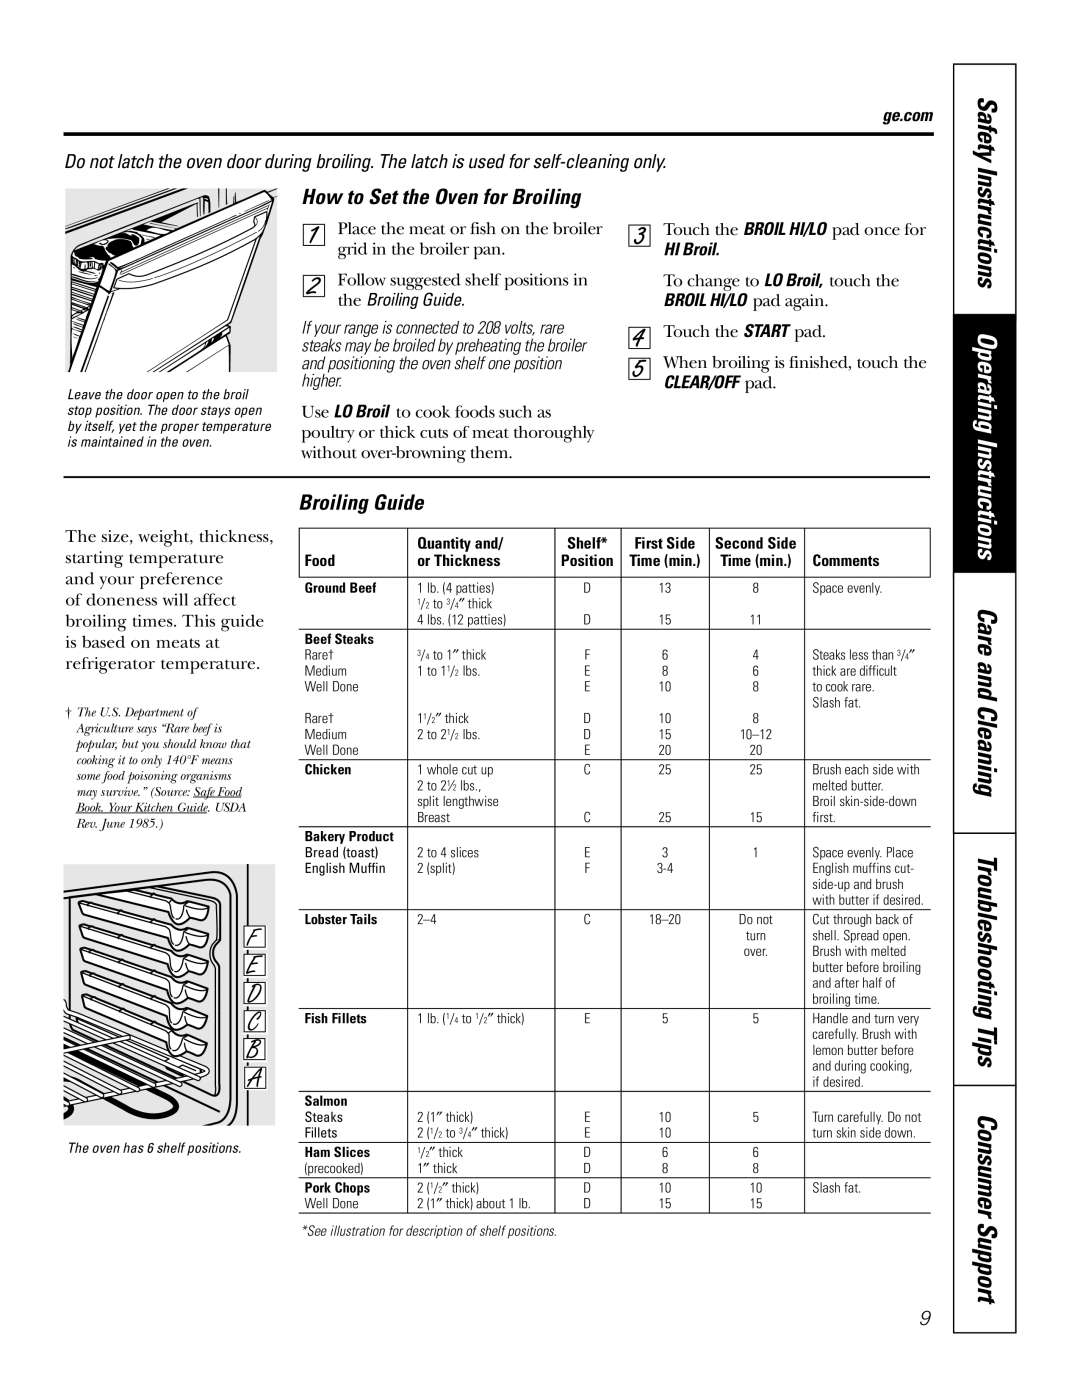 GE JBP27 Instructions Operating, How to Set the Oven for Broiling, Safety, the Broiling Guide, Quantity and, Shelf 